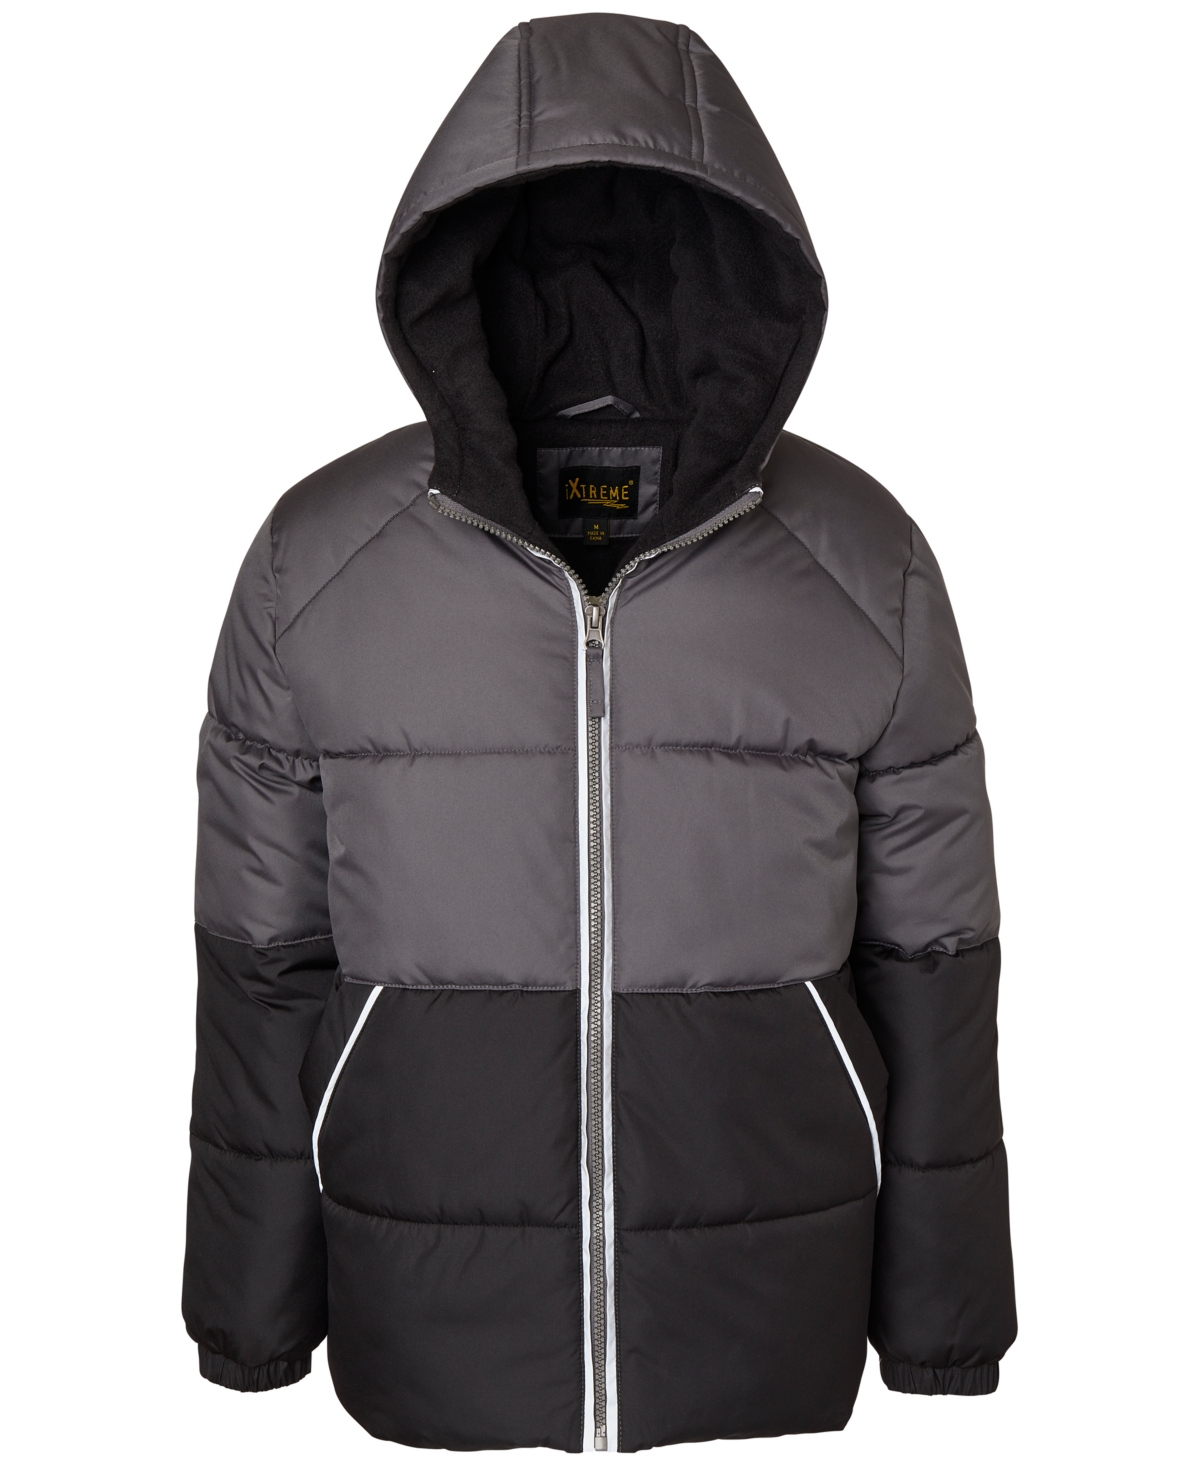 Wippette Ixtreme Big Boys Oxford Hooded Puffer Jacket In Black